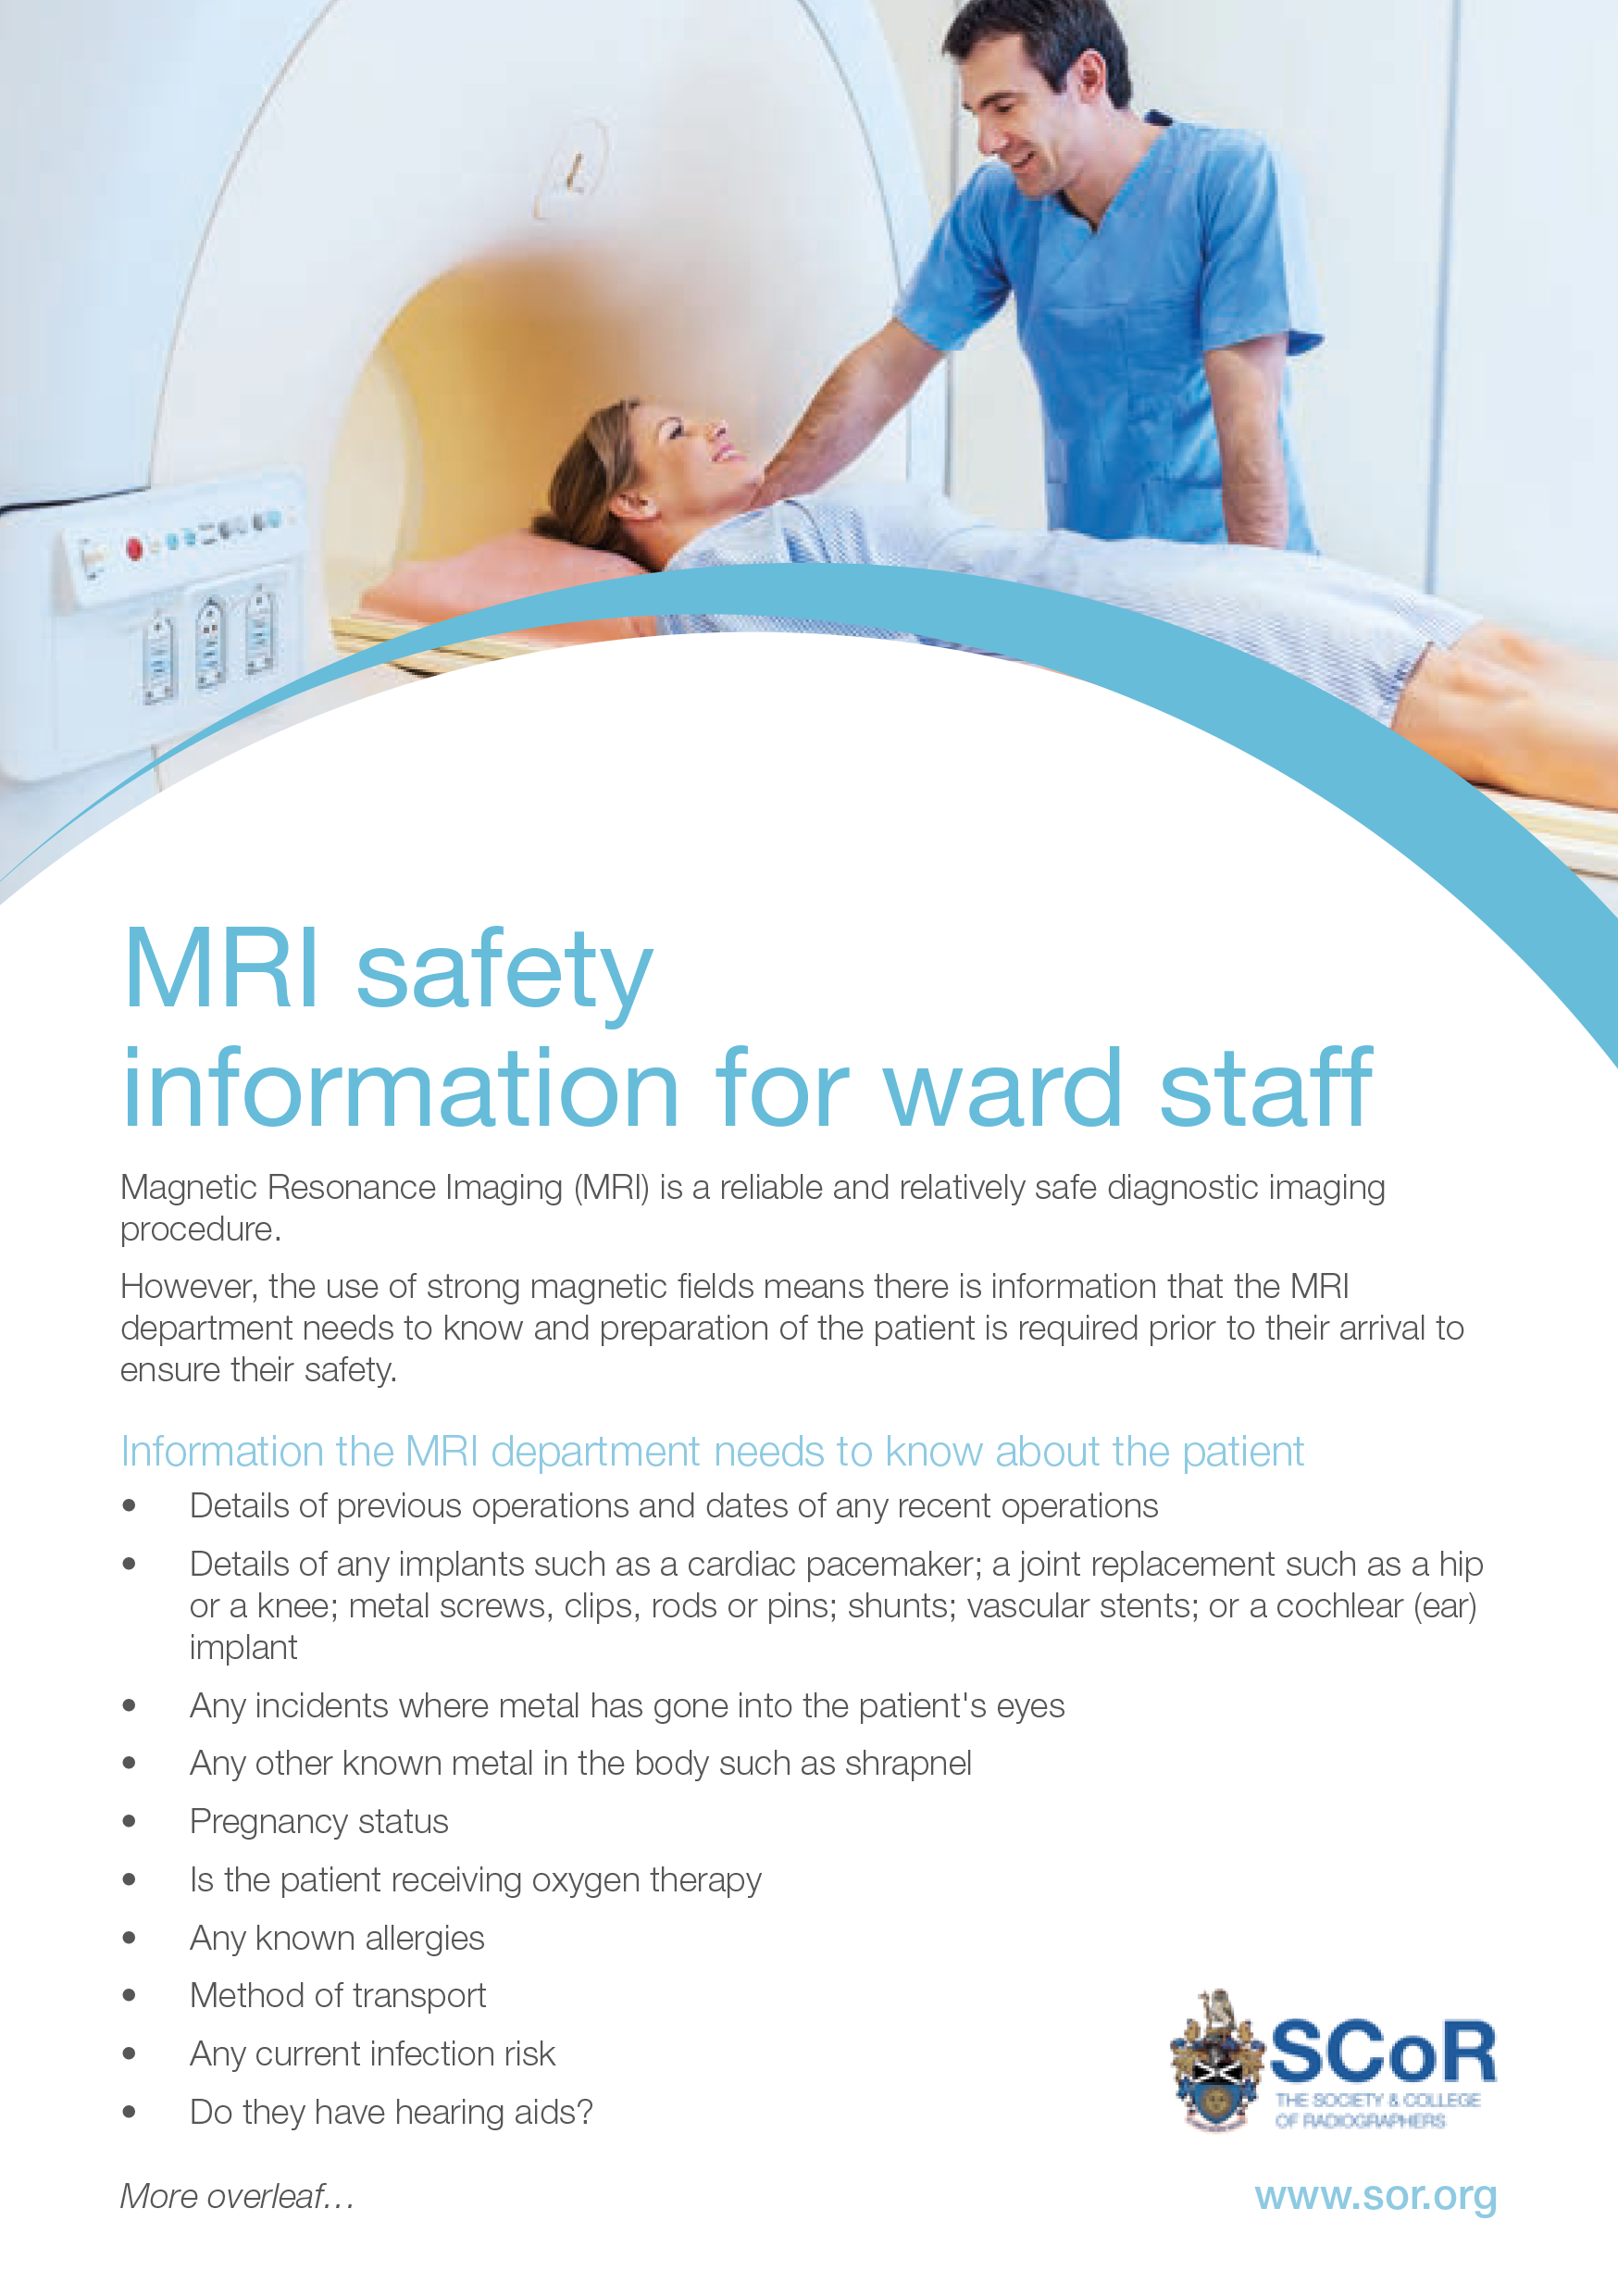 MRI safety guidelines